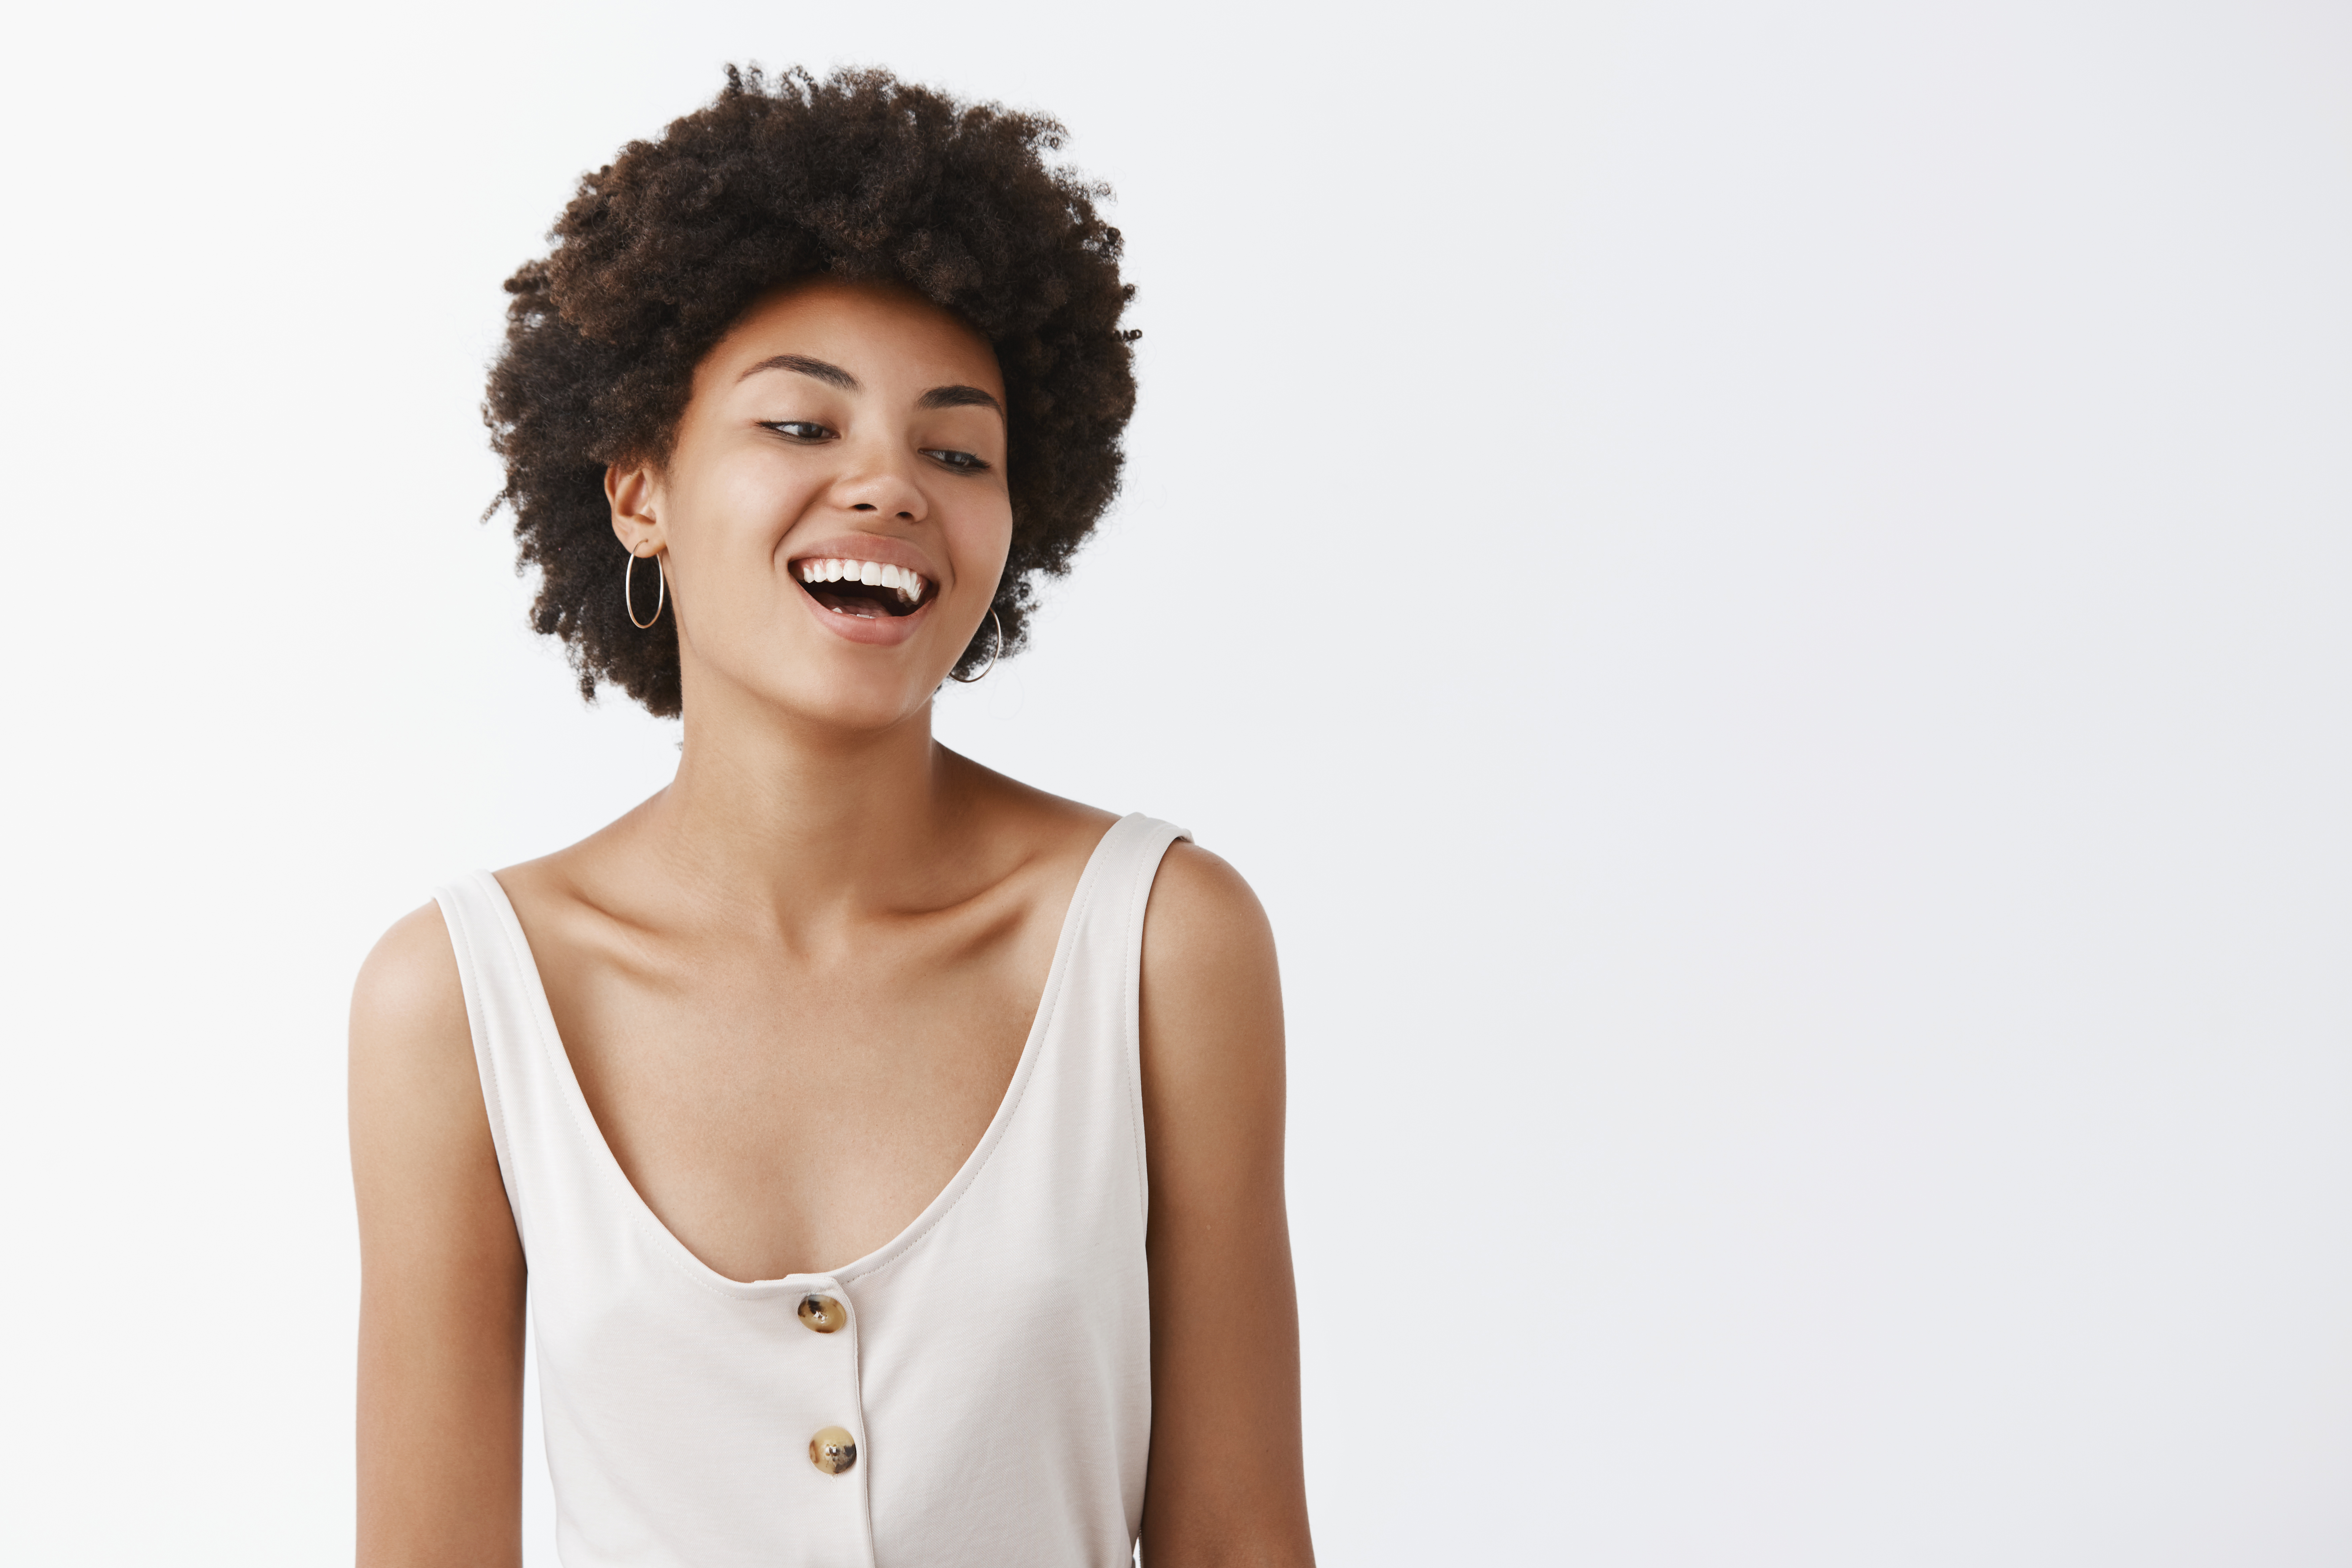 Waist-up shot of carefree emotive and joyful African-American female student with afro hairstyle, laughing out loud and gazing right with amusement and joy, posing over gray background.